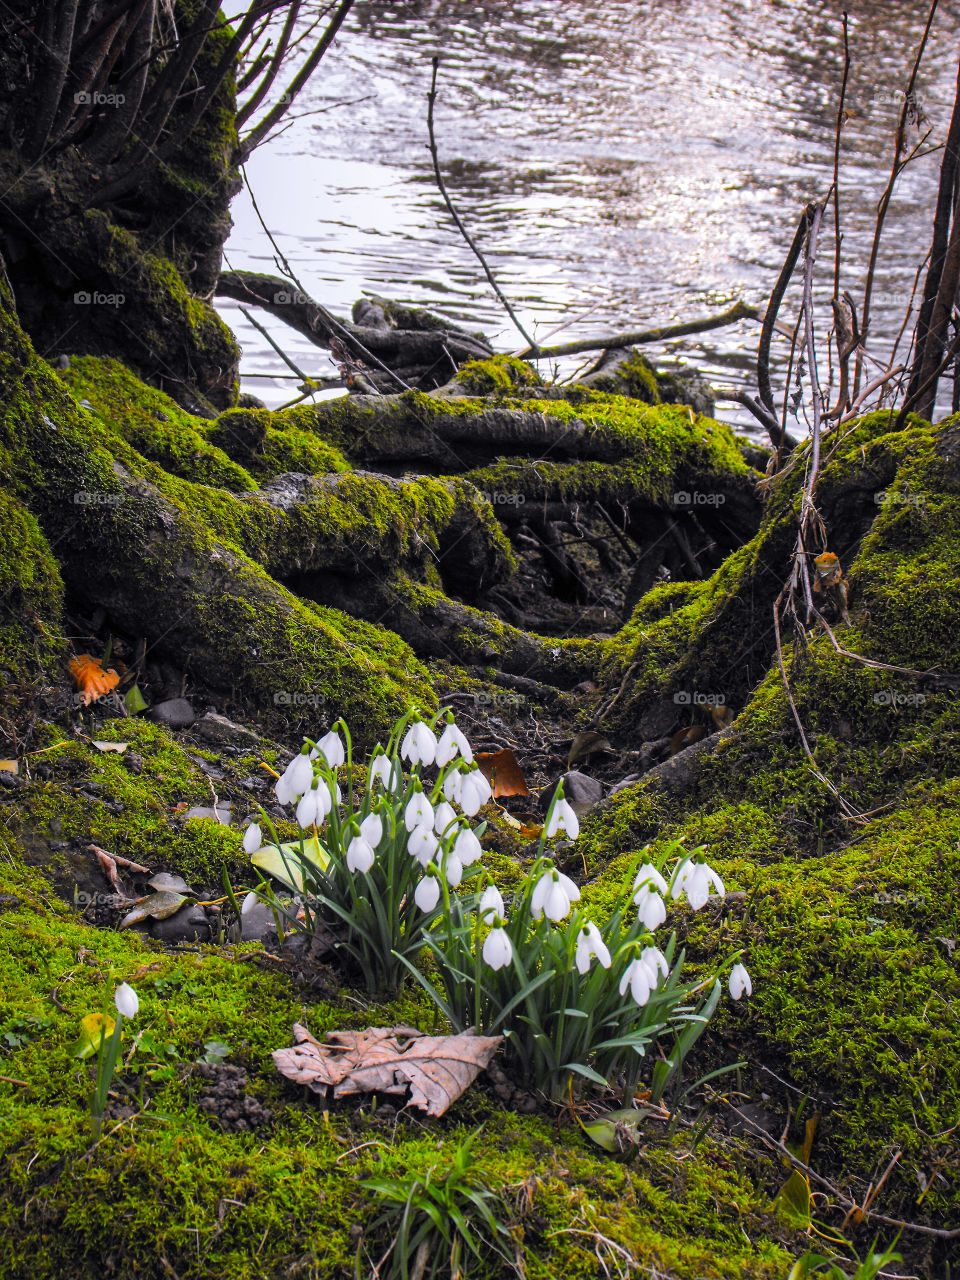 Moss, roots, snowdrops